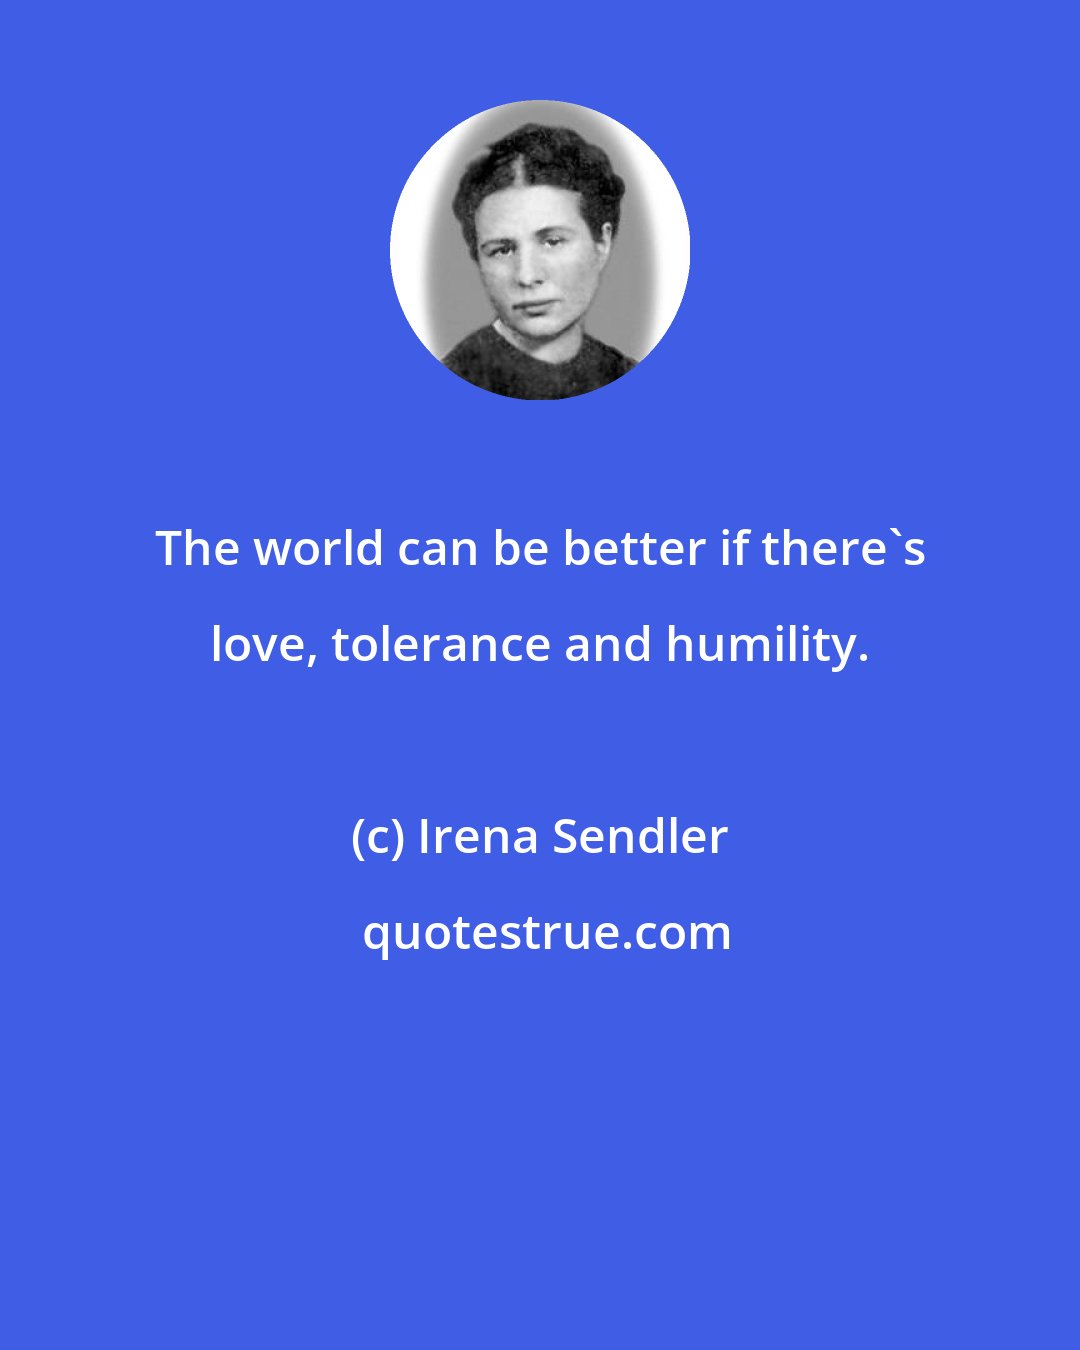 Irena Sendler: The world can be better if there's love, tolerance and humility.